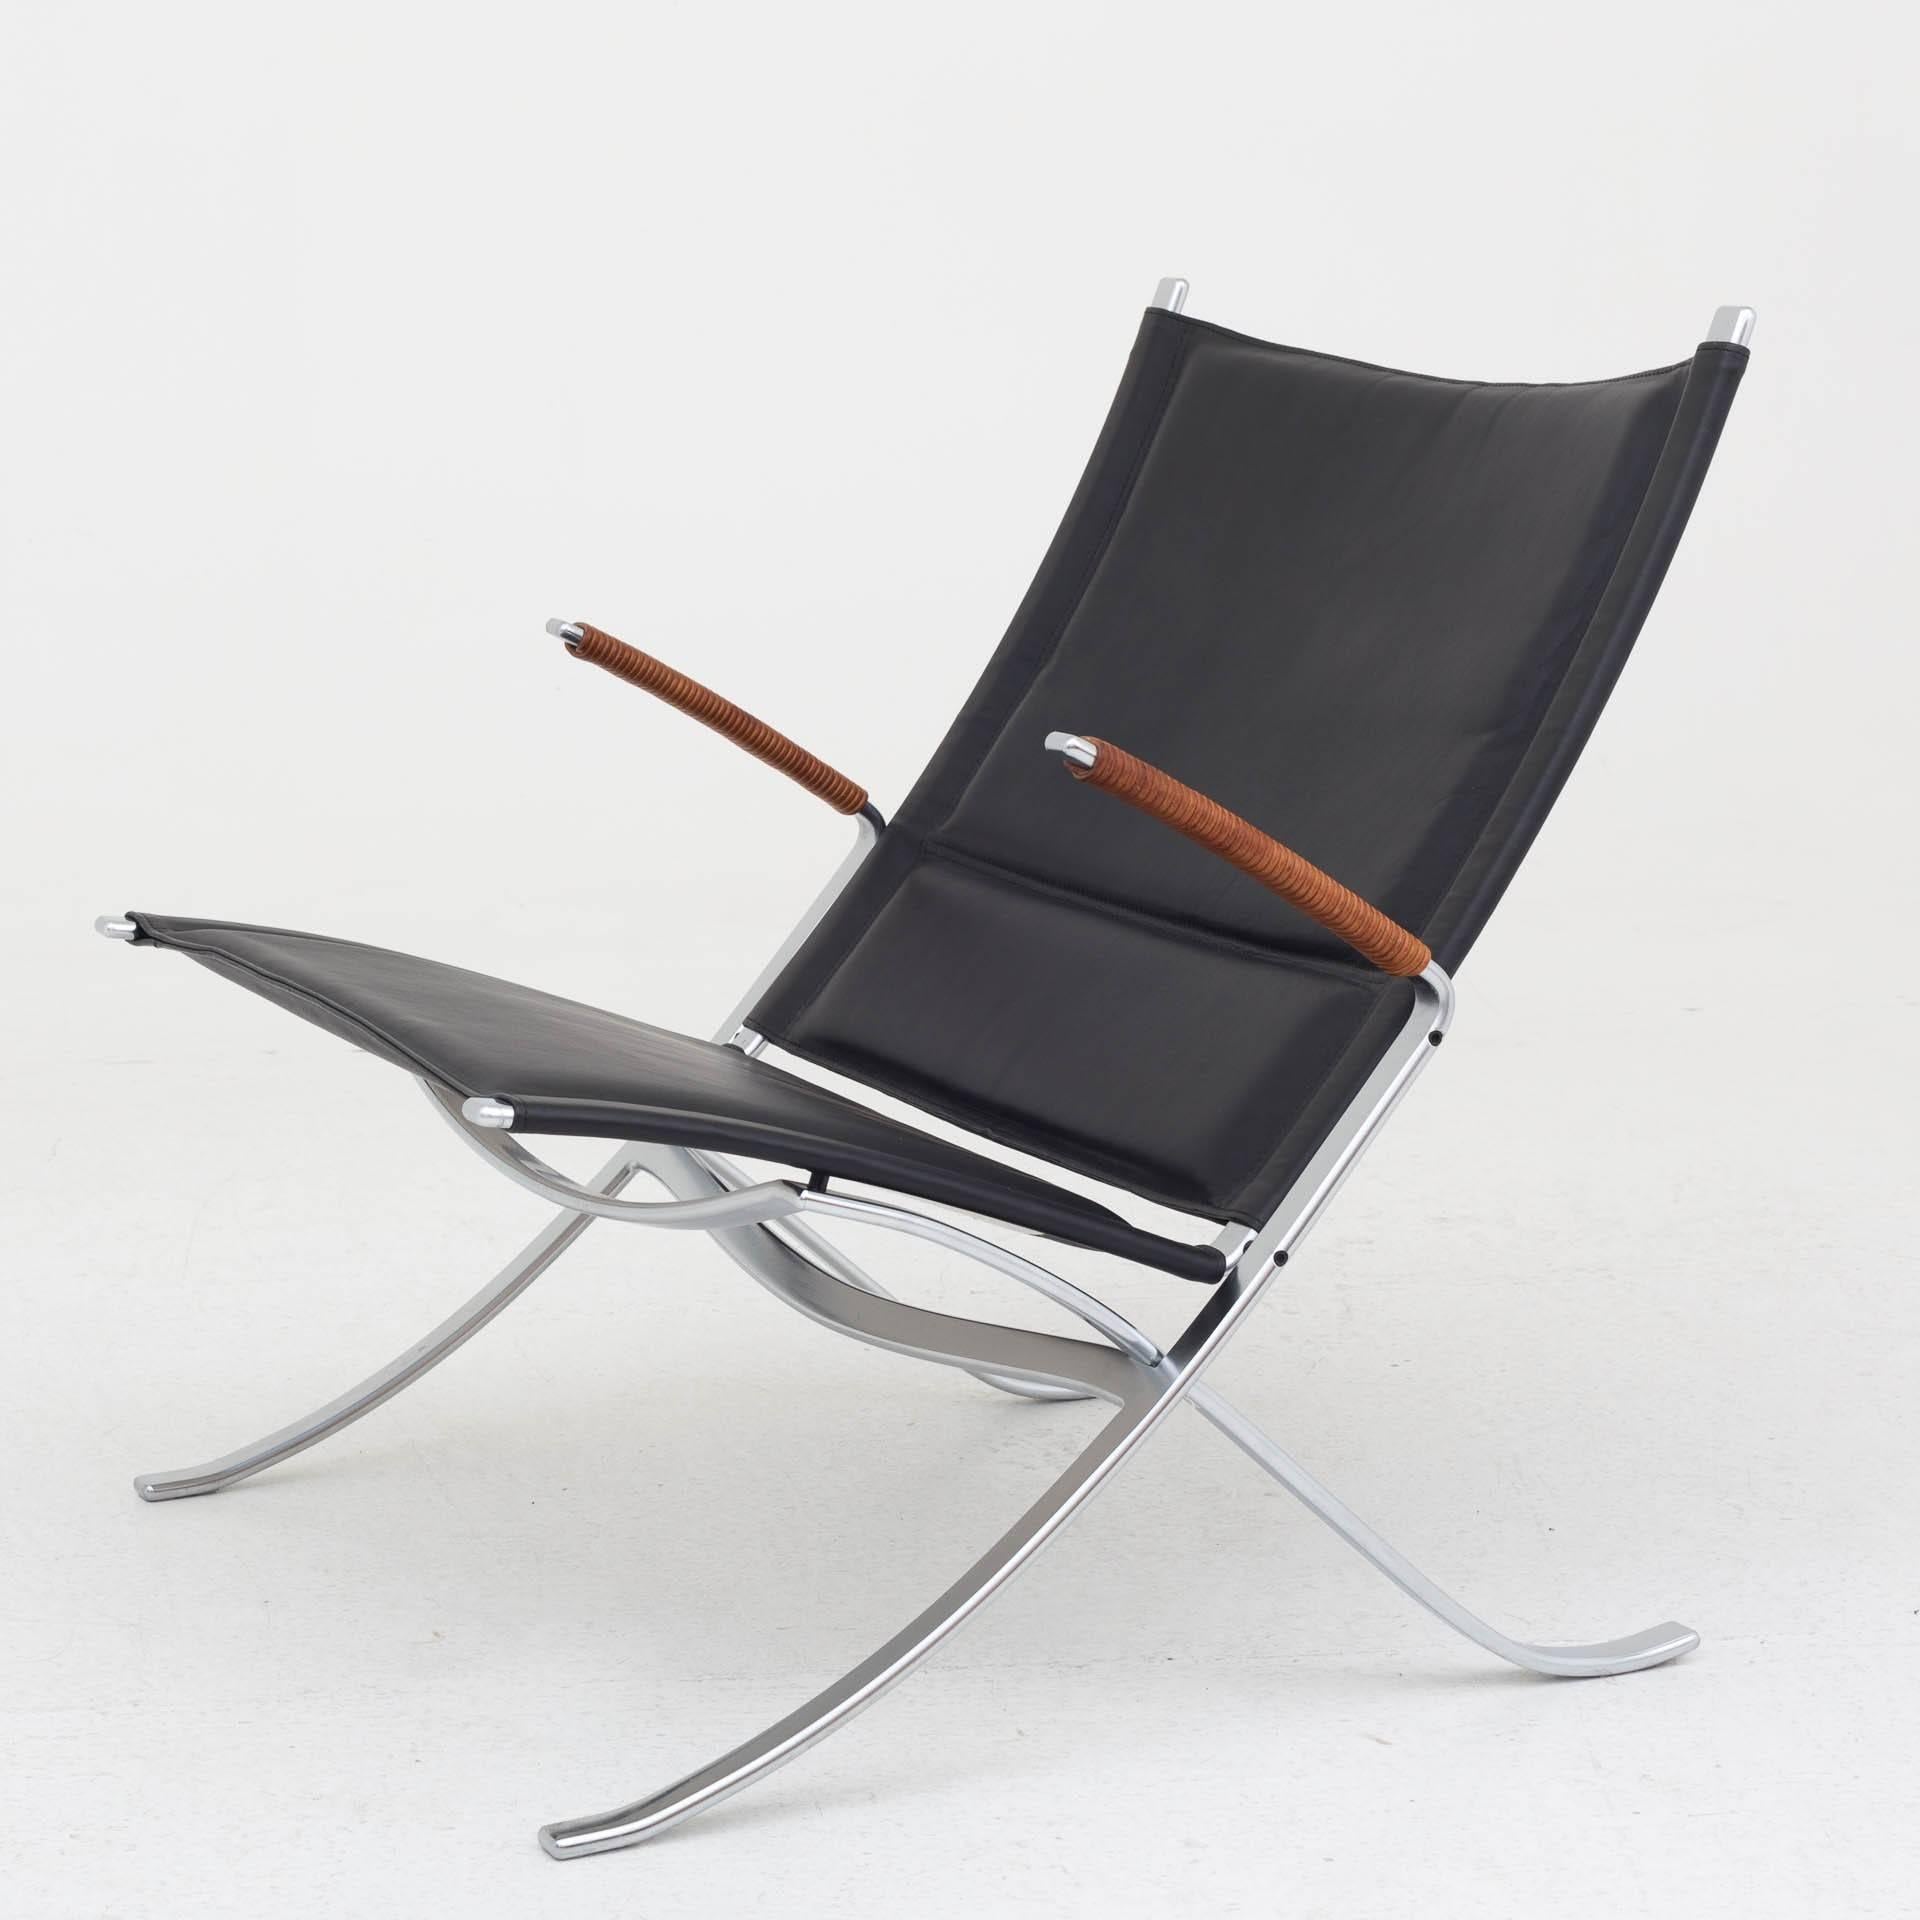 FK 82 – X-chair in black leather and natural leather on armrests. Steel frame.